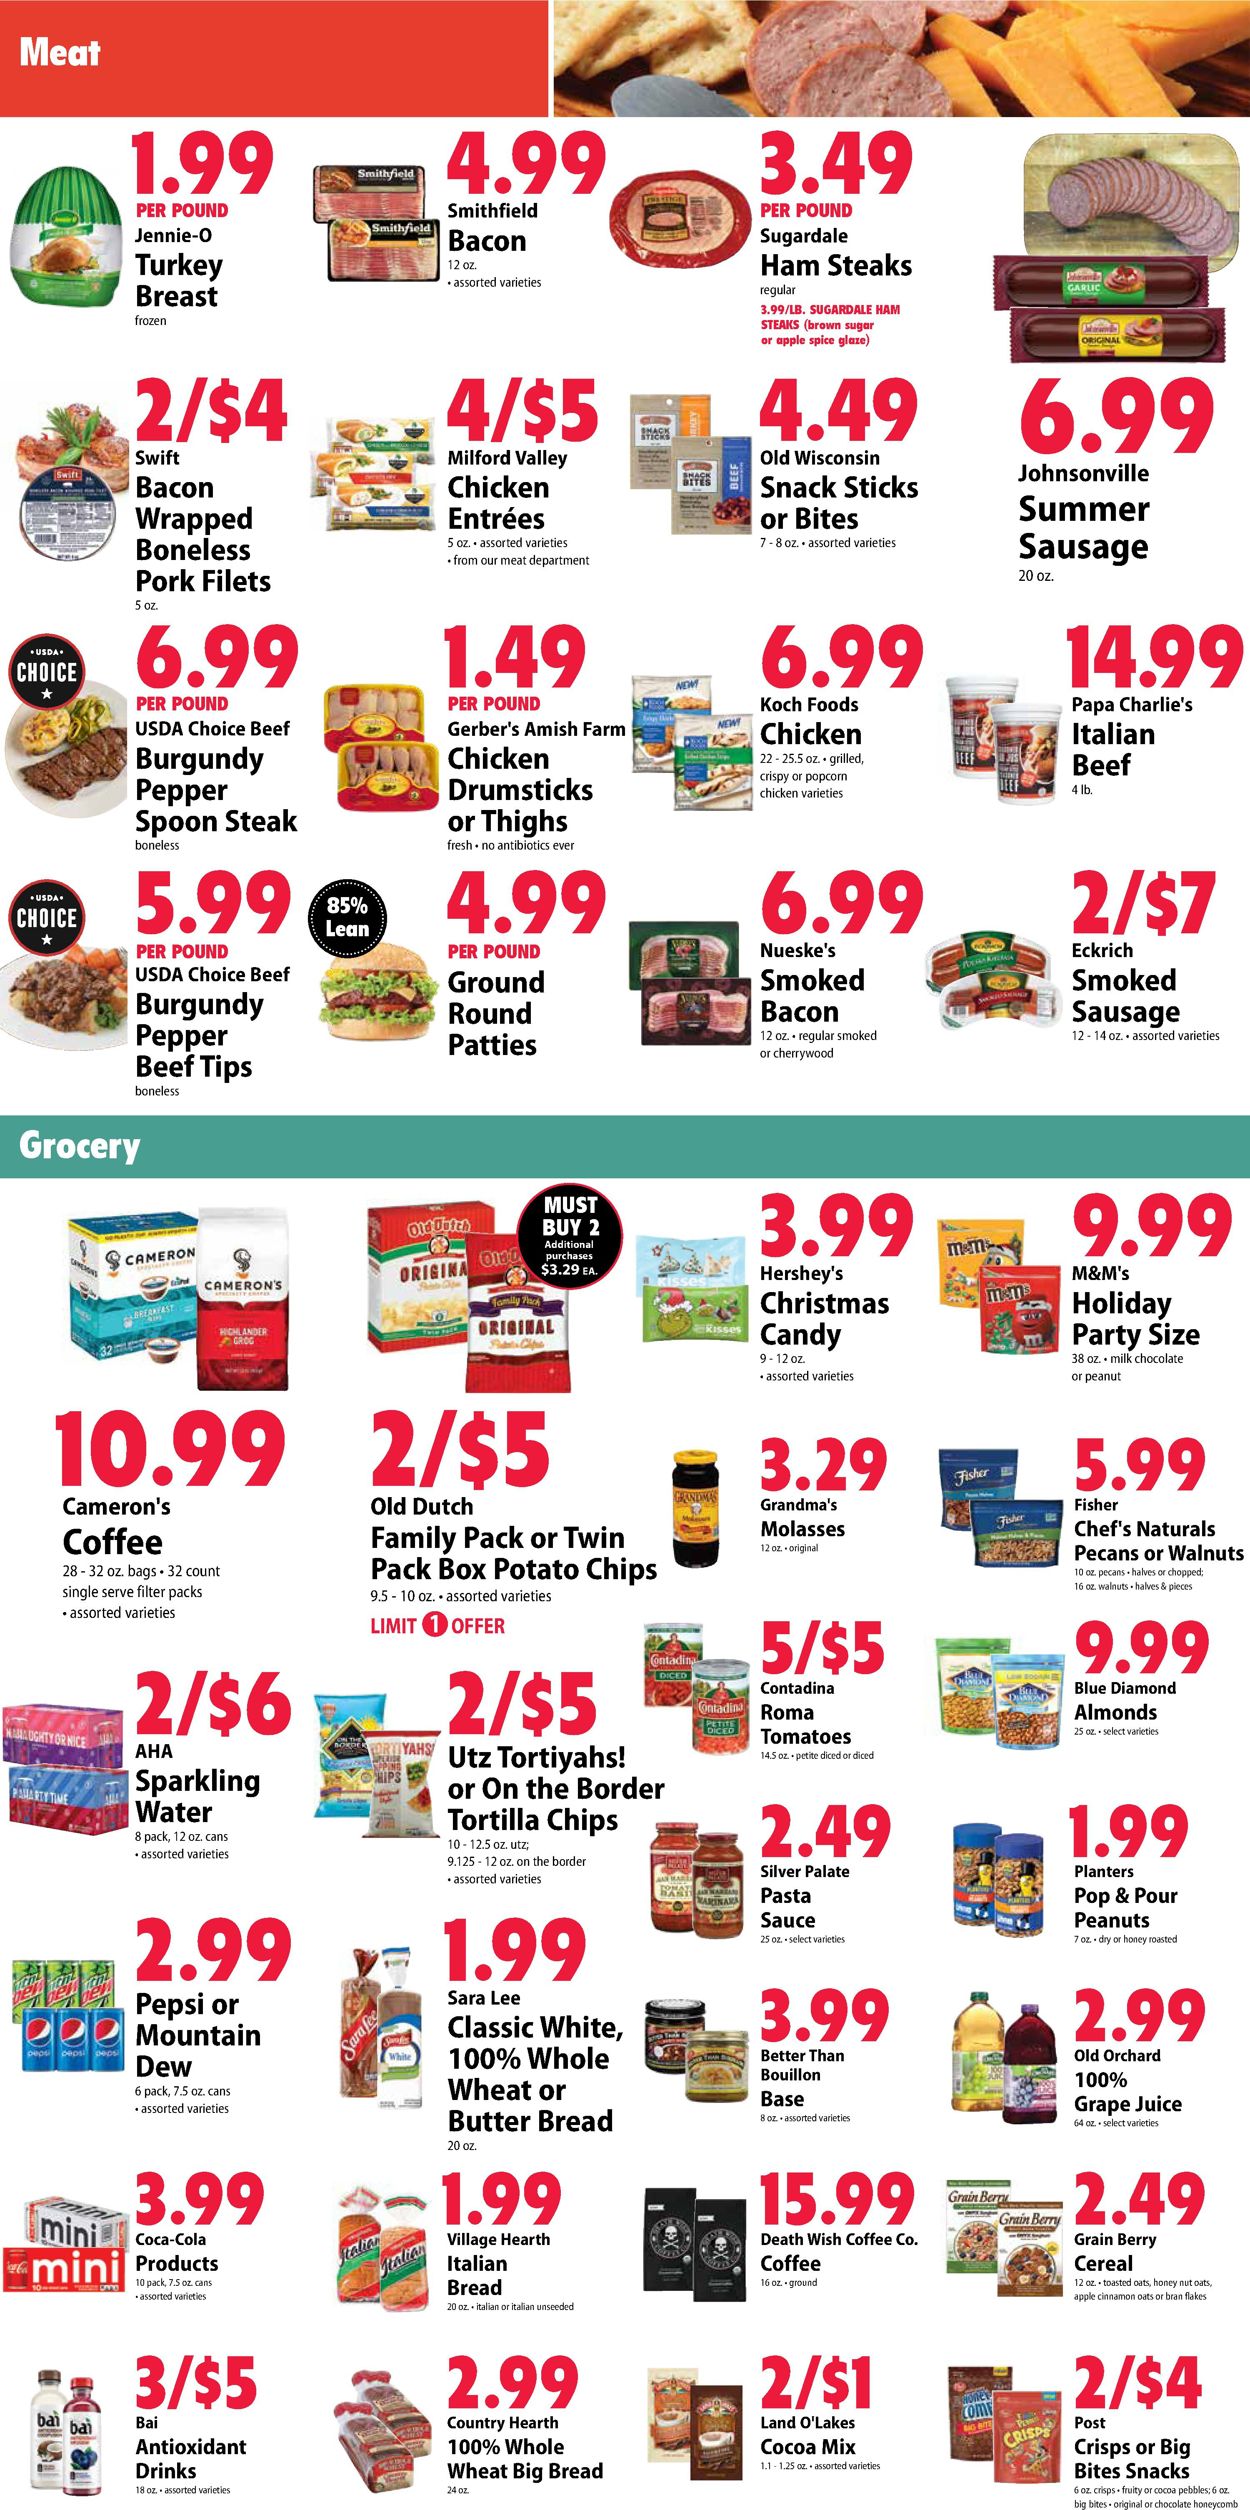 Festival Foods HOLIDAYS 2021 Weekly Ad Circular - valid 12/01-12/07/2021 (Page 2)